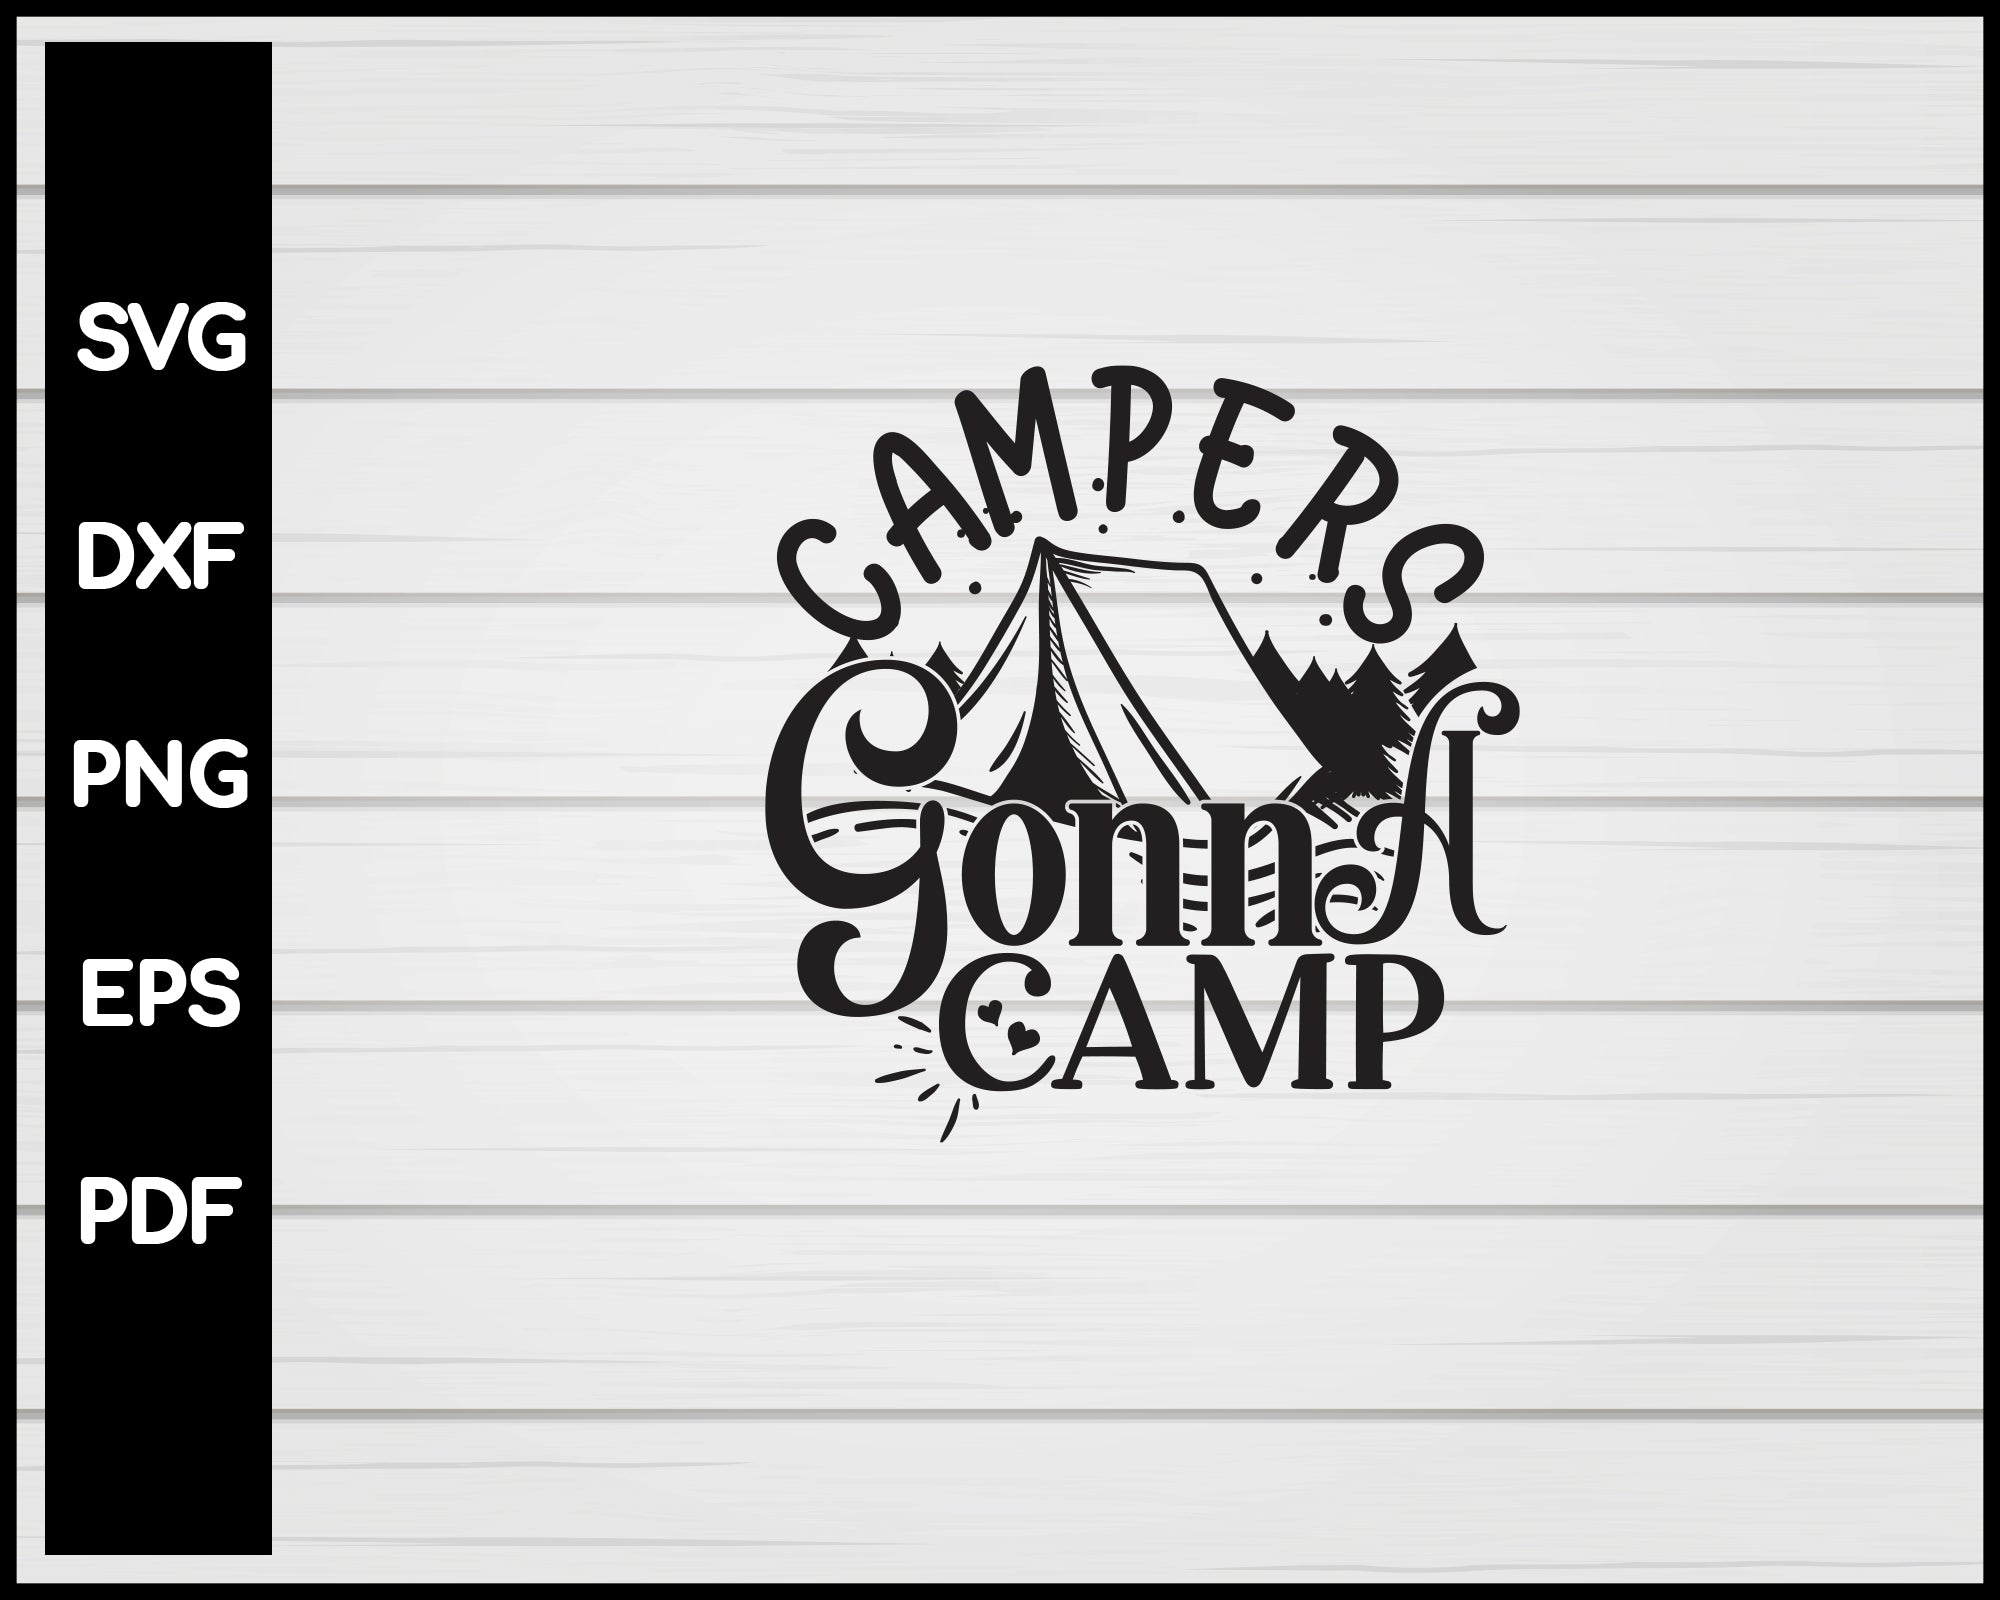 Campers Gonna Camp svg Cut File For Cricut Silhouette eps png dxf Printable Files